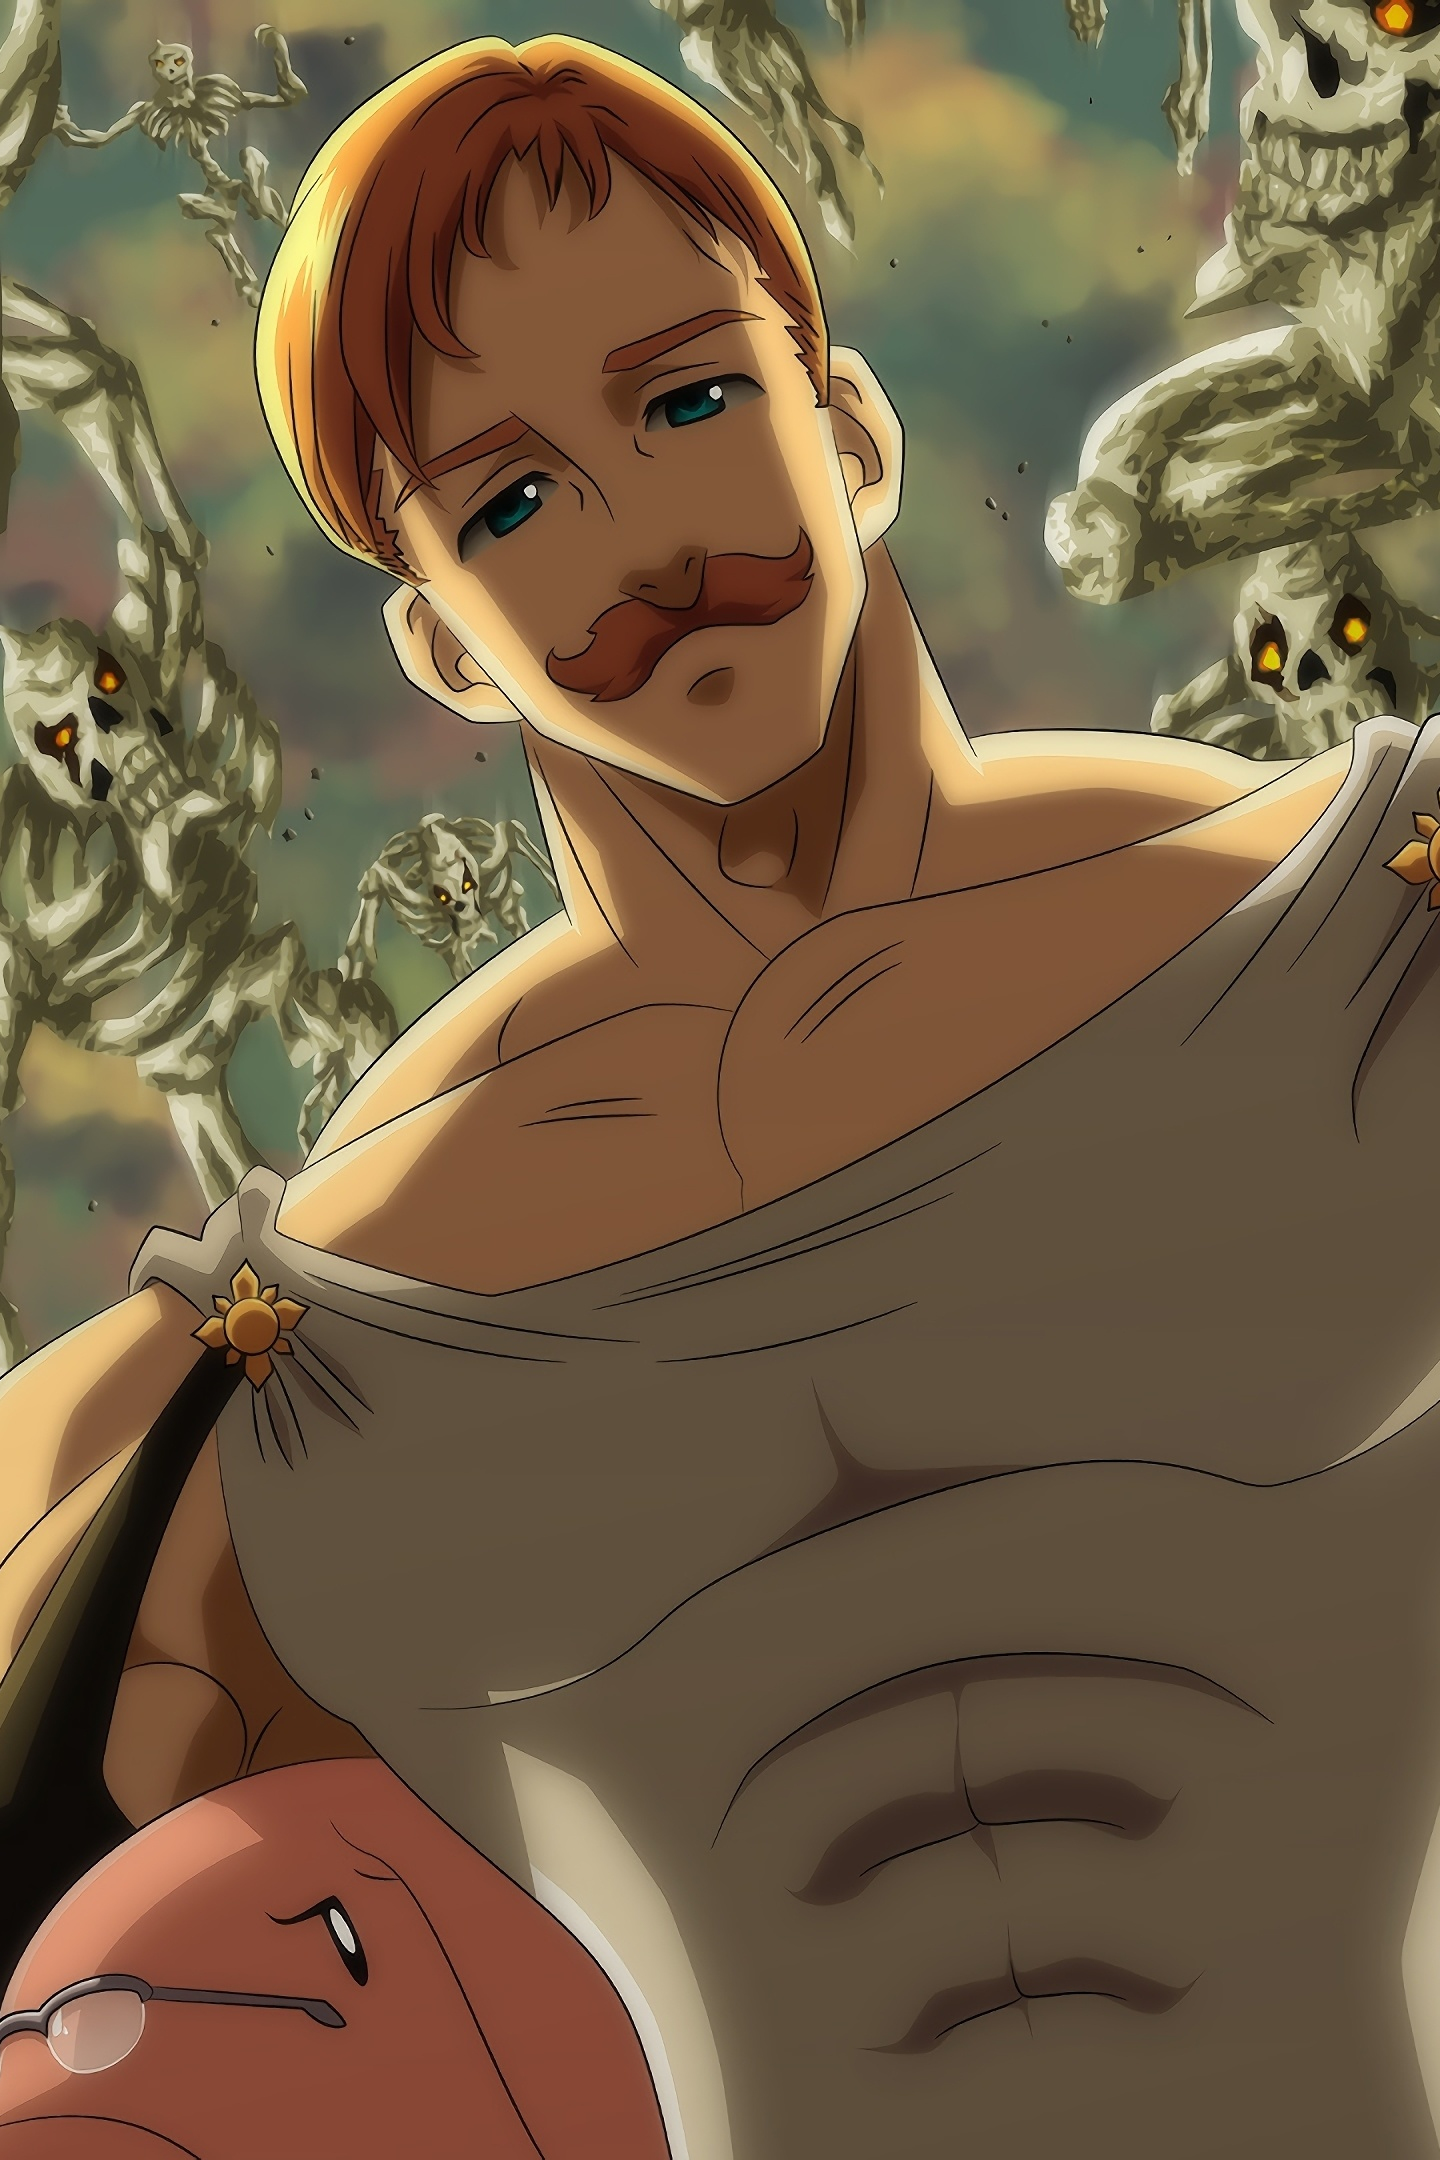 Download wallpaper 1440x2630 anime boy, escanor, the seven deadly sins,  anime, samsung galaxy note 8, 1440x2630 hd background, 4628